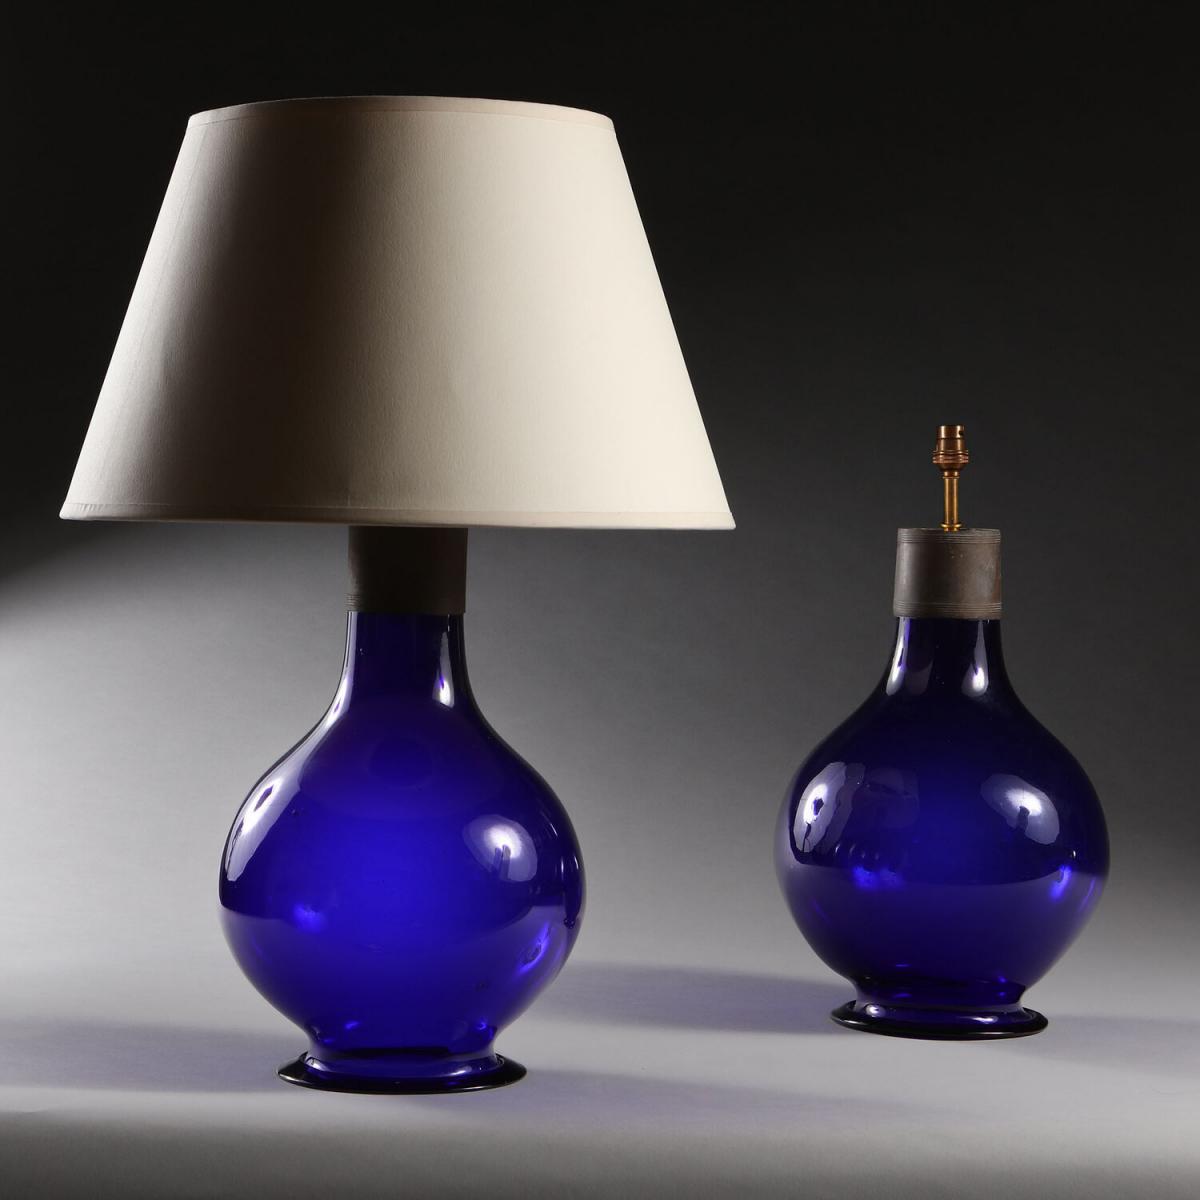 A Pair of Imperial Blue Glass Lamps